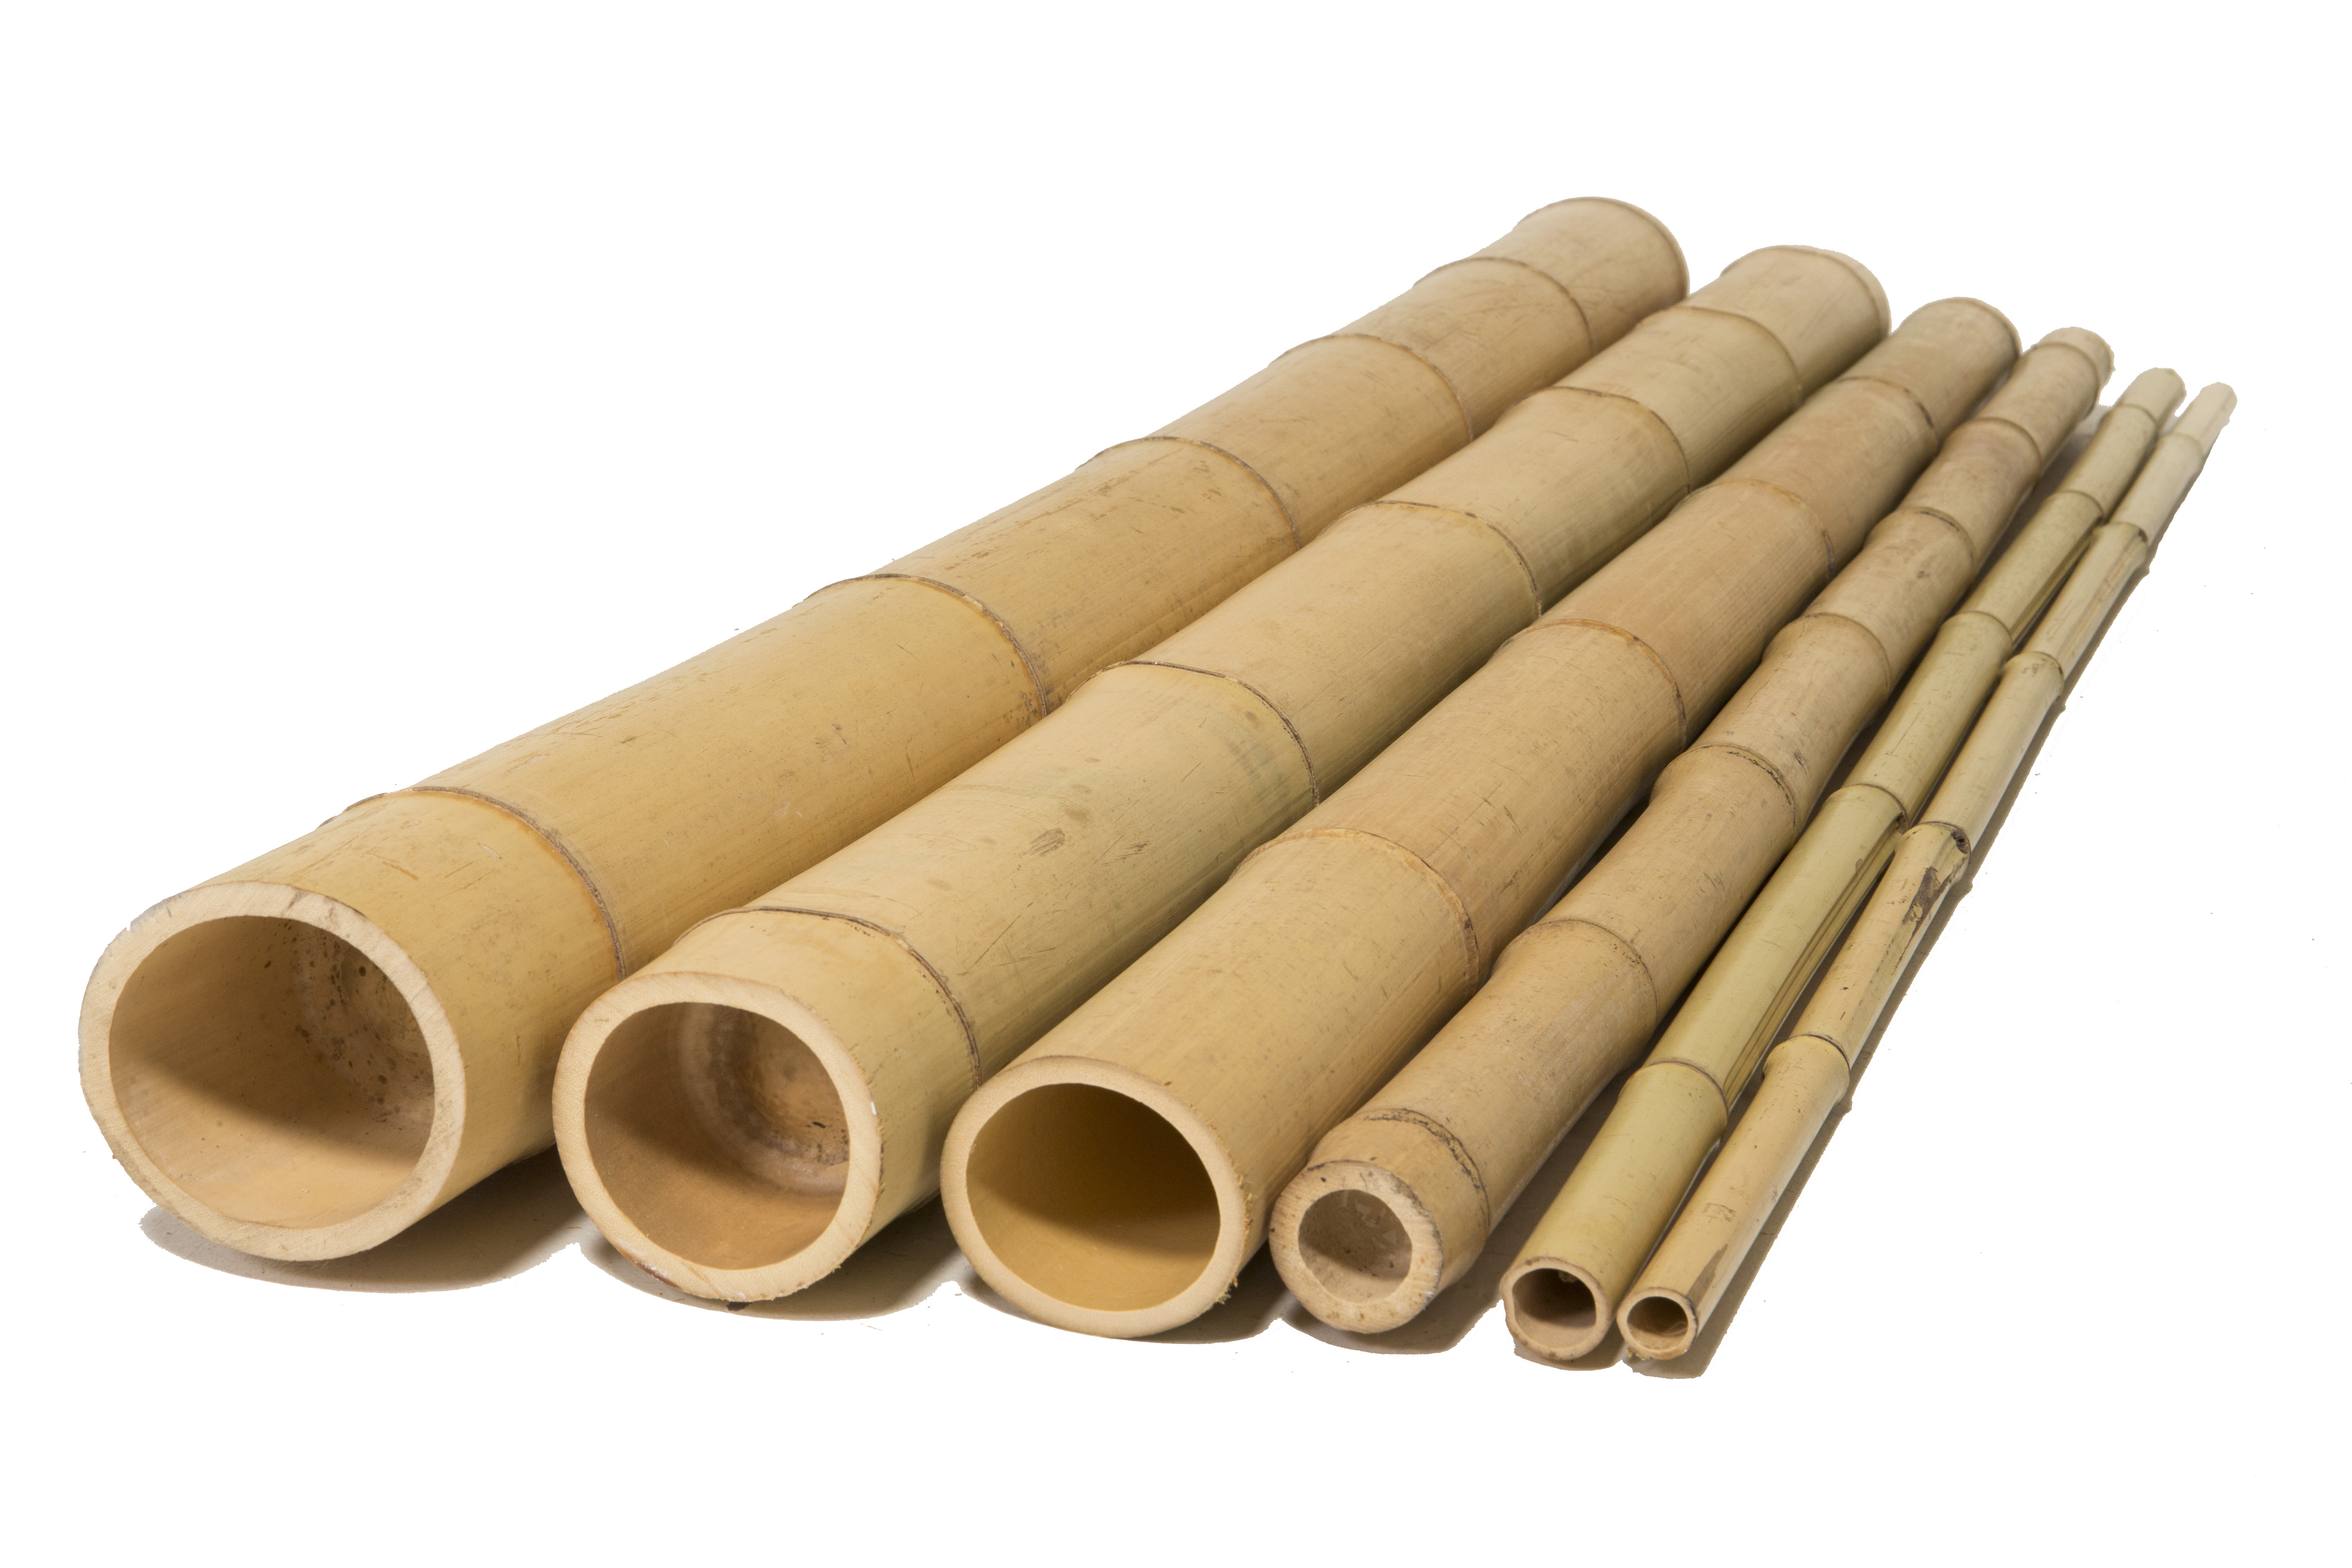 Tonkin Bamboo Poles For Sale - BYXS Commercial